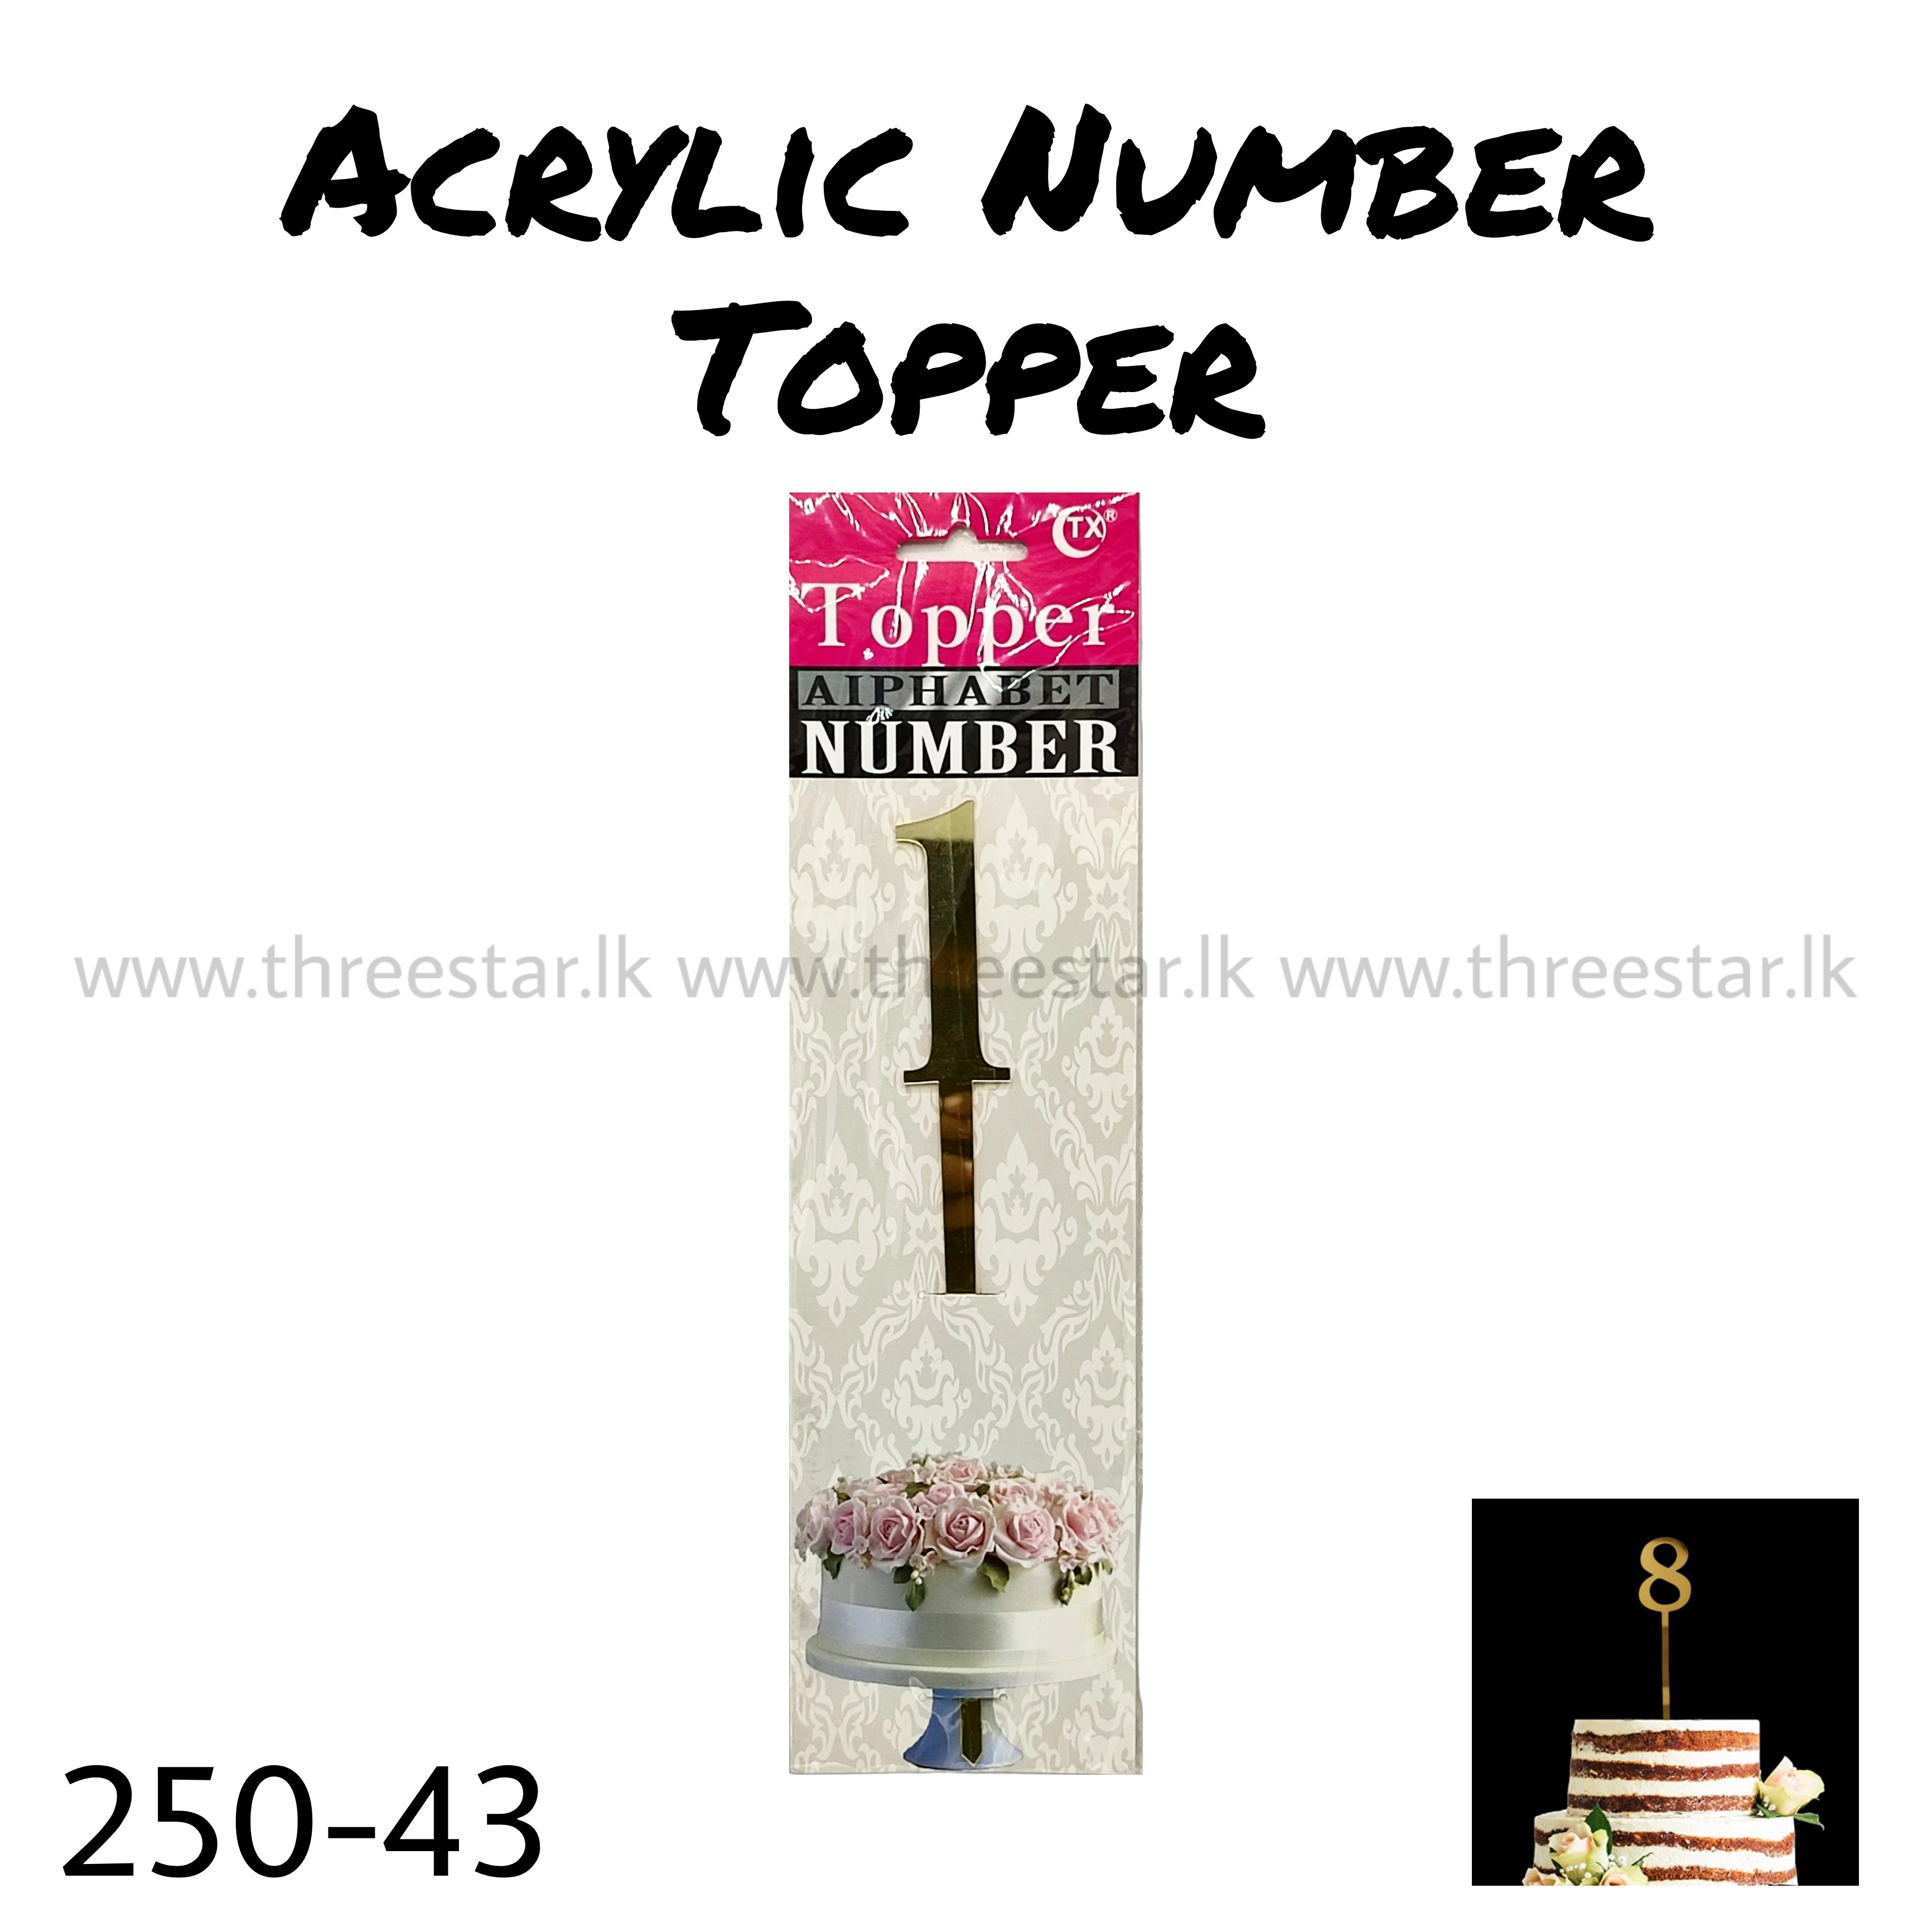 Acrylic Number Topper 1